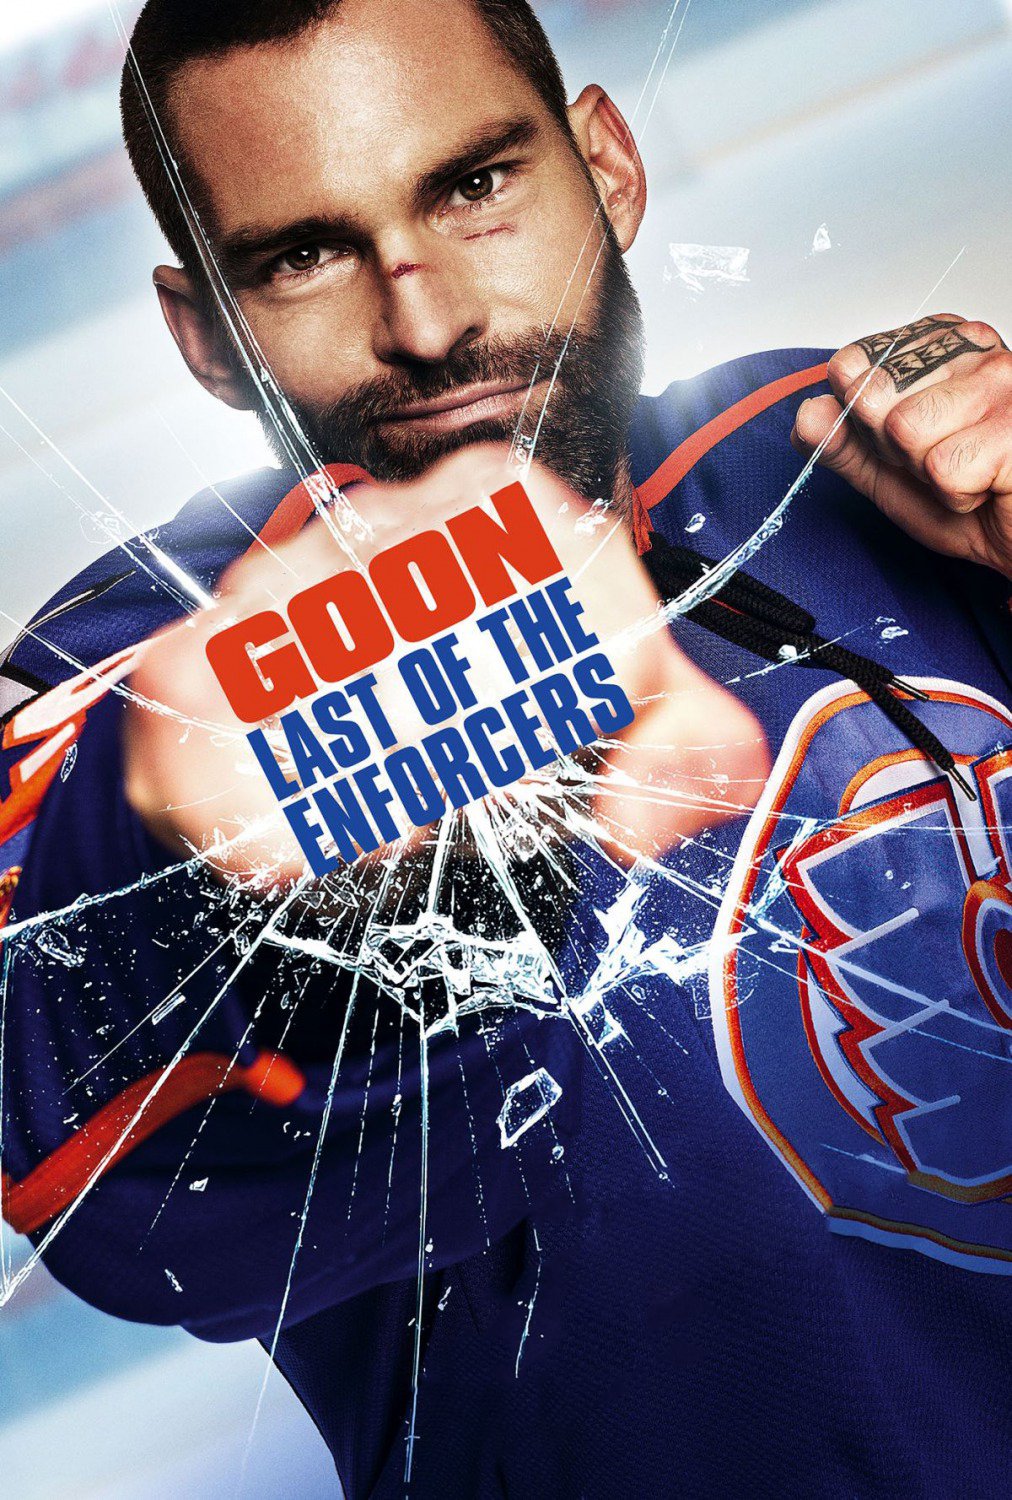 Goon: Last of the Enforcers Picture